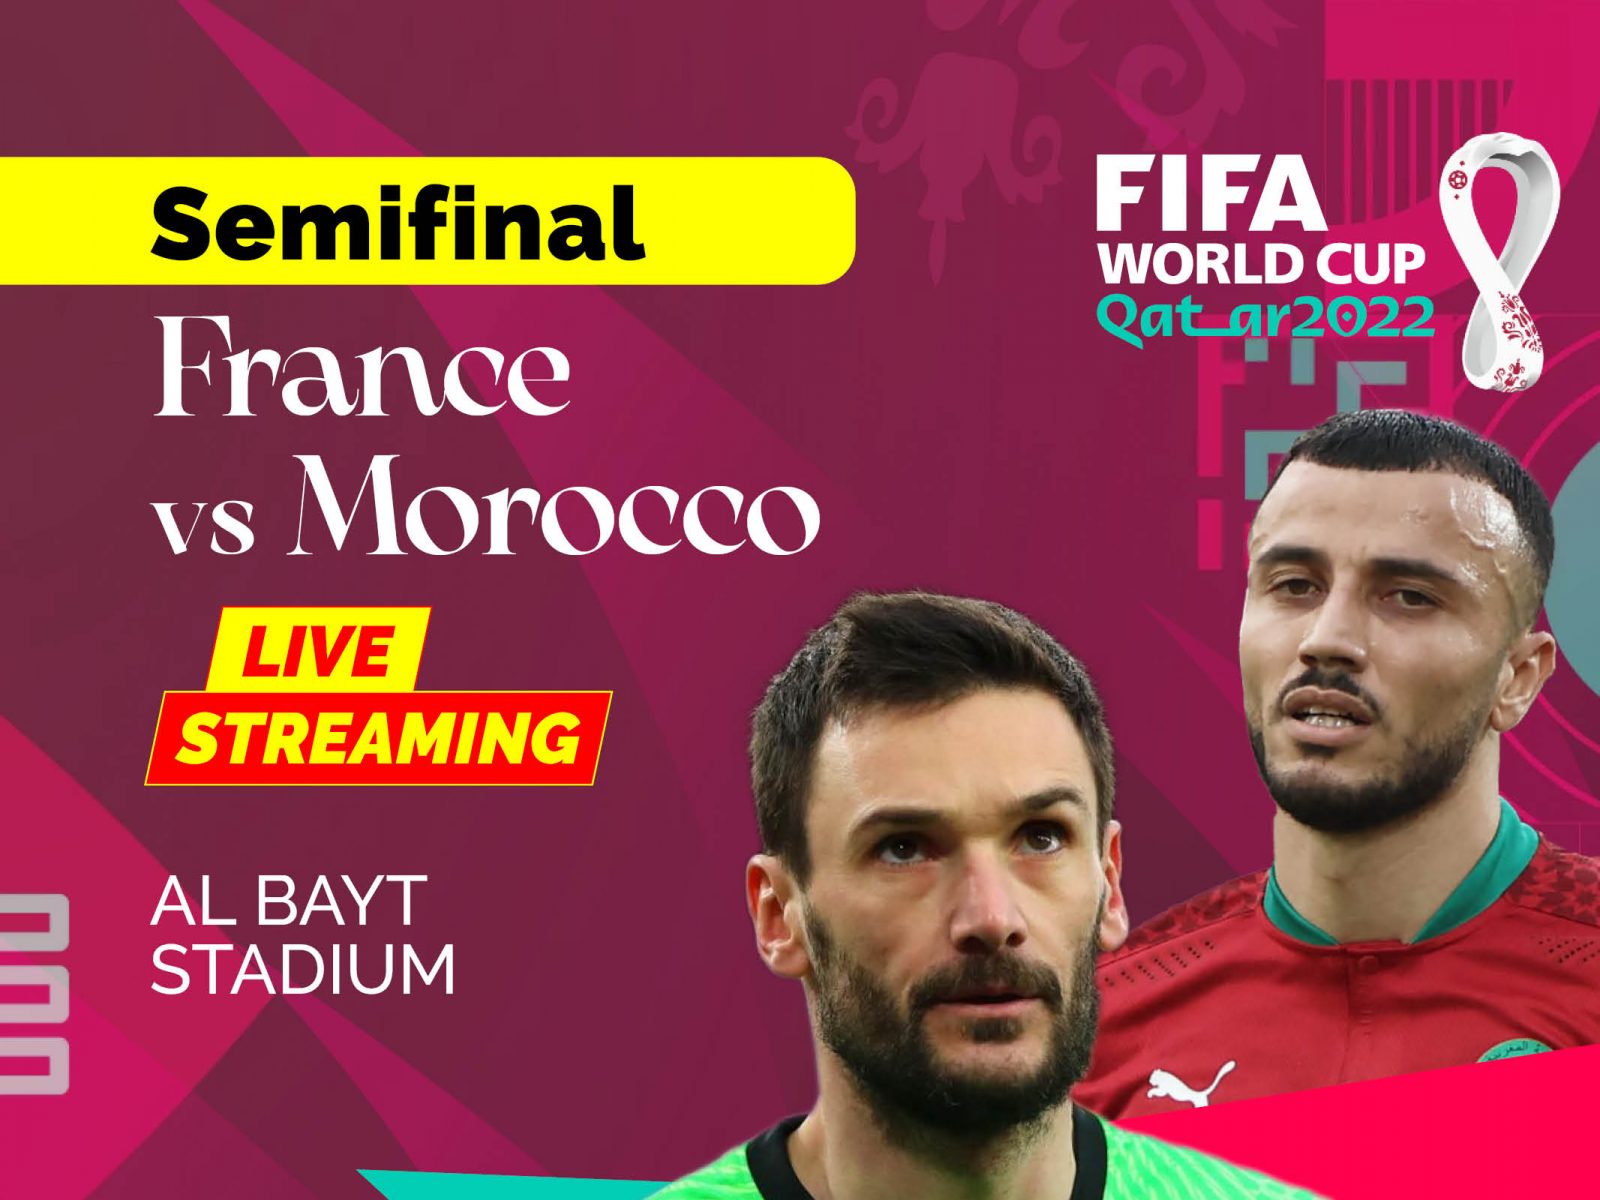 France vs Morocco Live Streaming How to Watch The FIFA World Cup 2022 Semi-final Match Coverage on TV And Online in India?